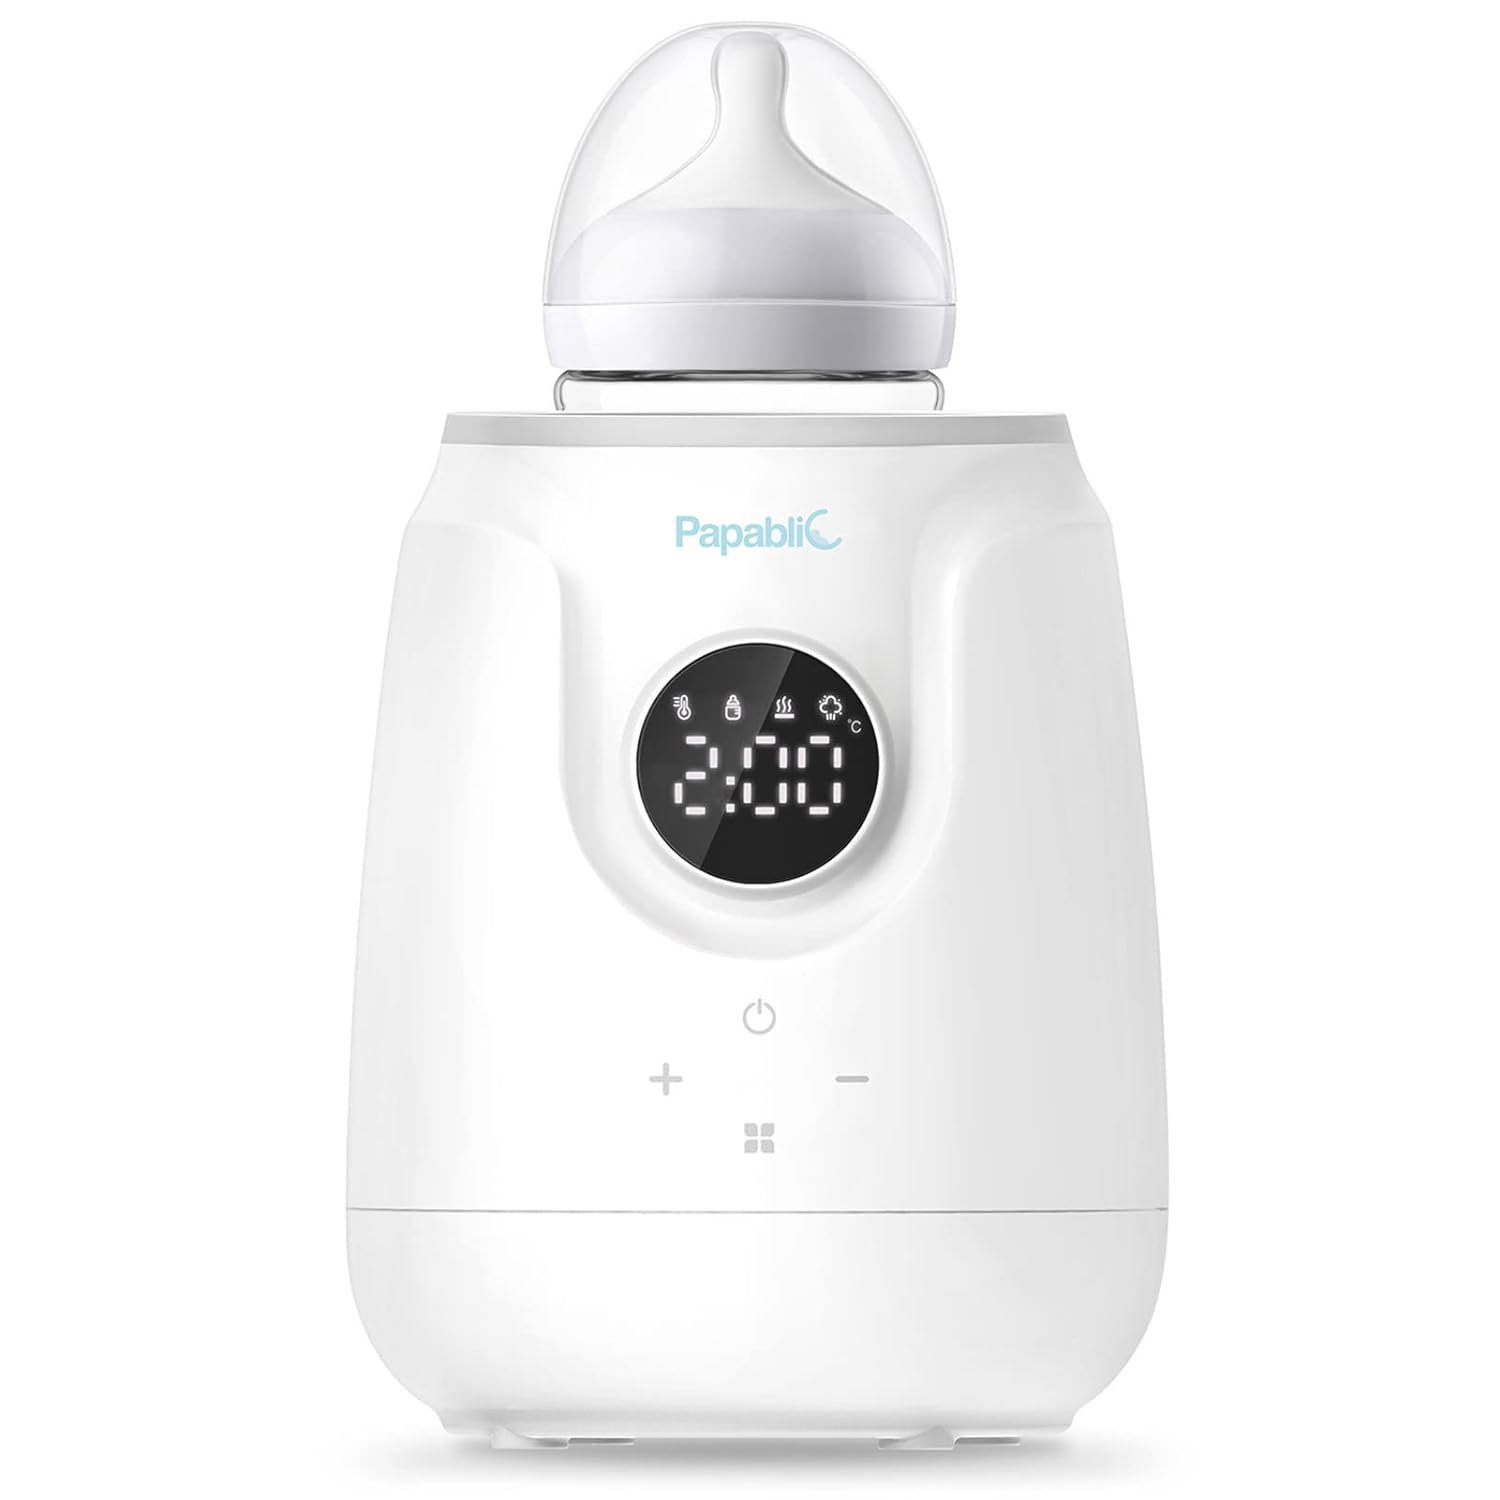 Papablic 5-in-1 Ultra-Fast Baby Bottle Warmer for Breastmilk and Formula, with Digital Timer and Automatic Shut-Off